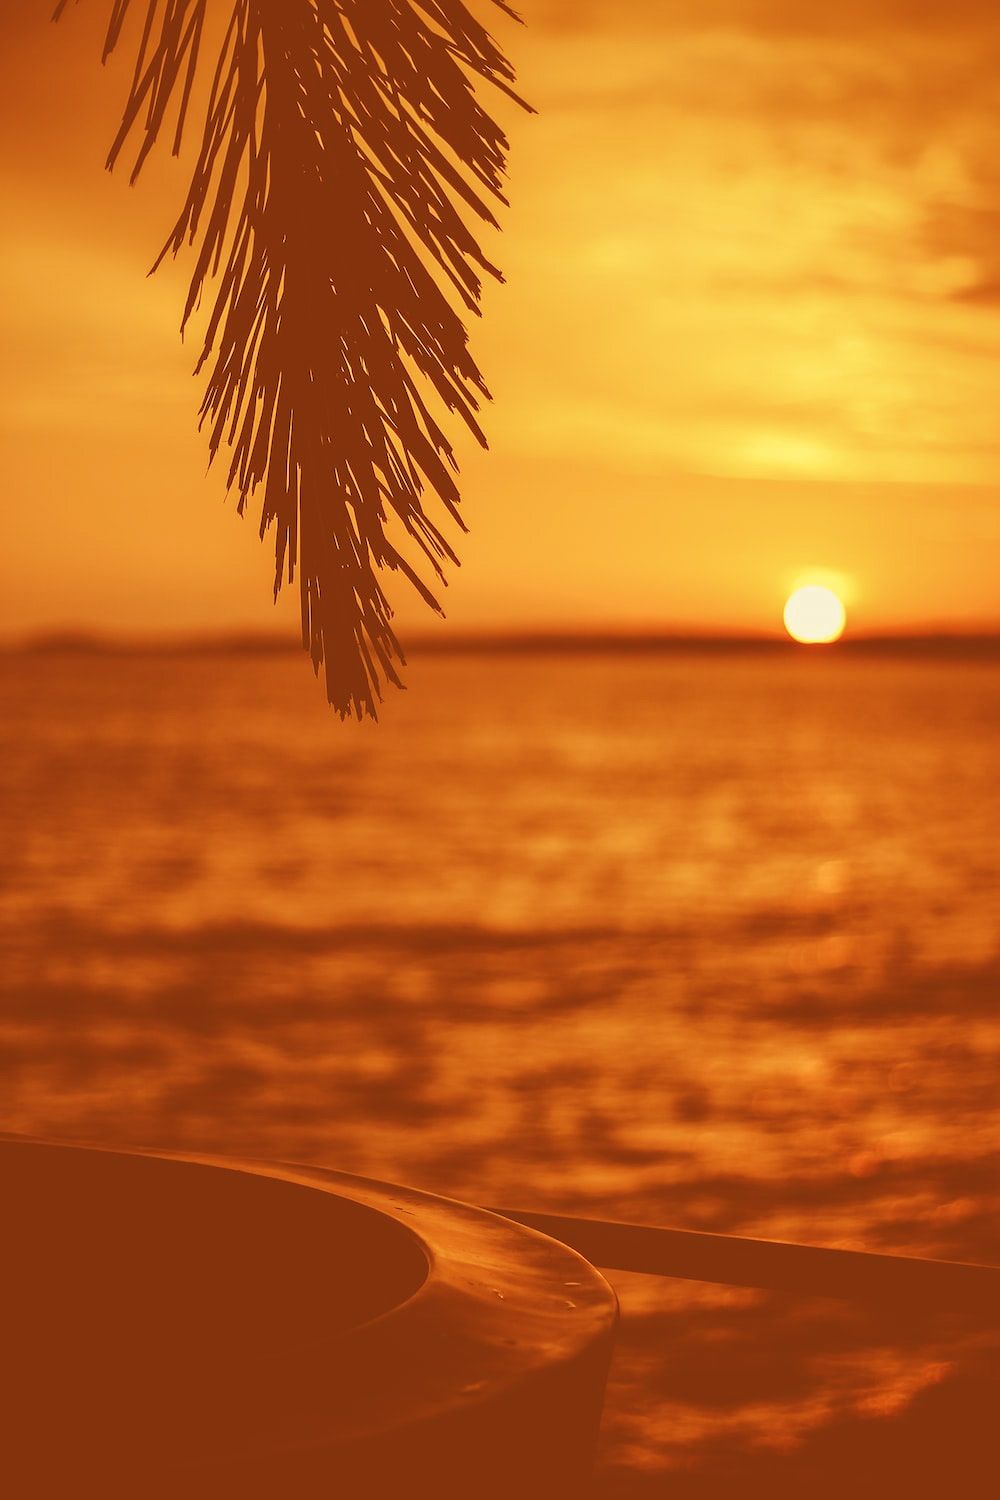 A palm tree leaf in front of a sunset over the ocean - Summer, sunset